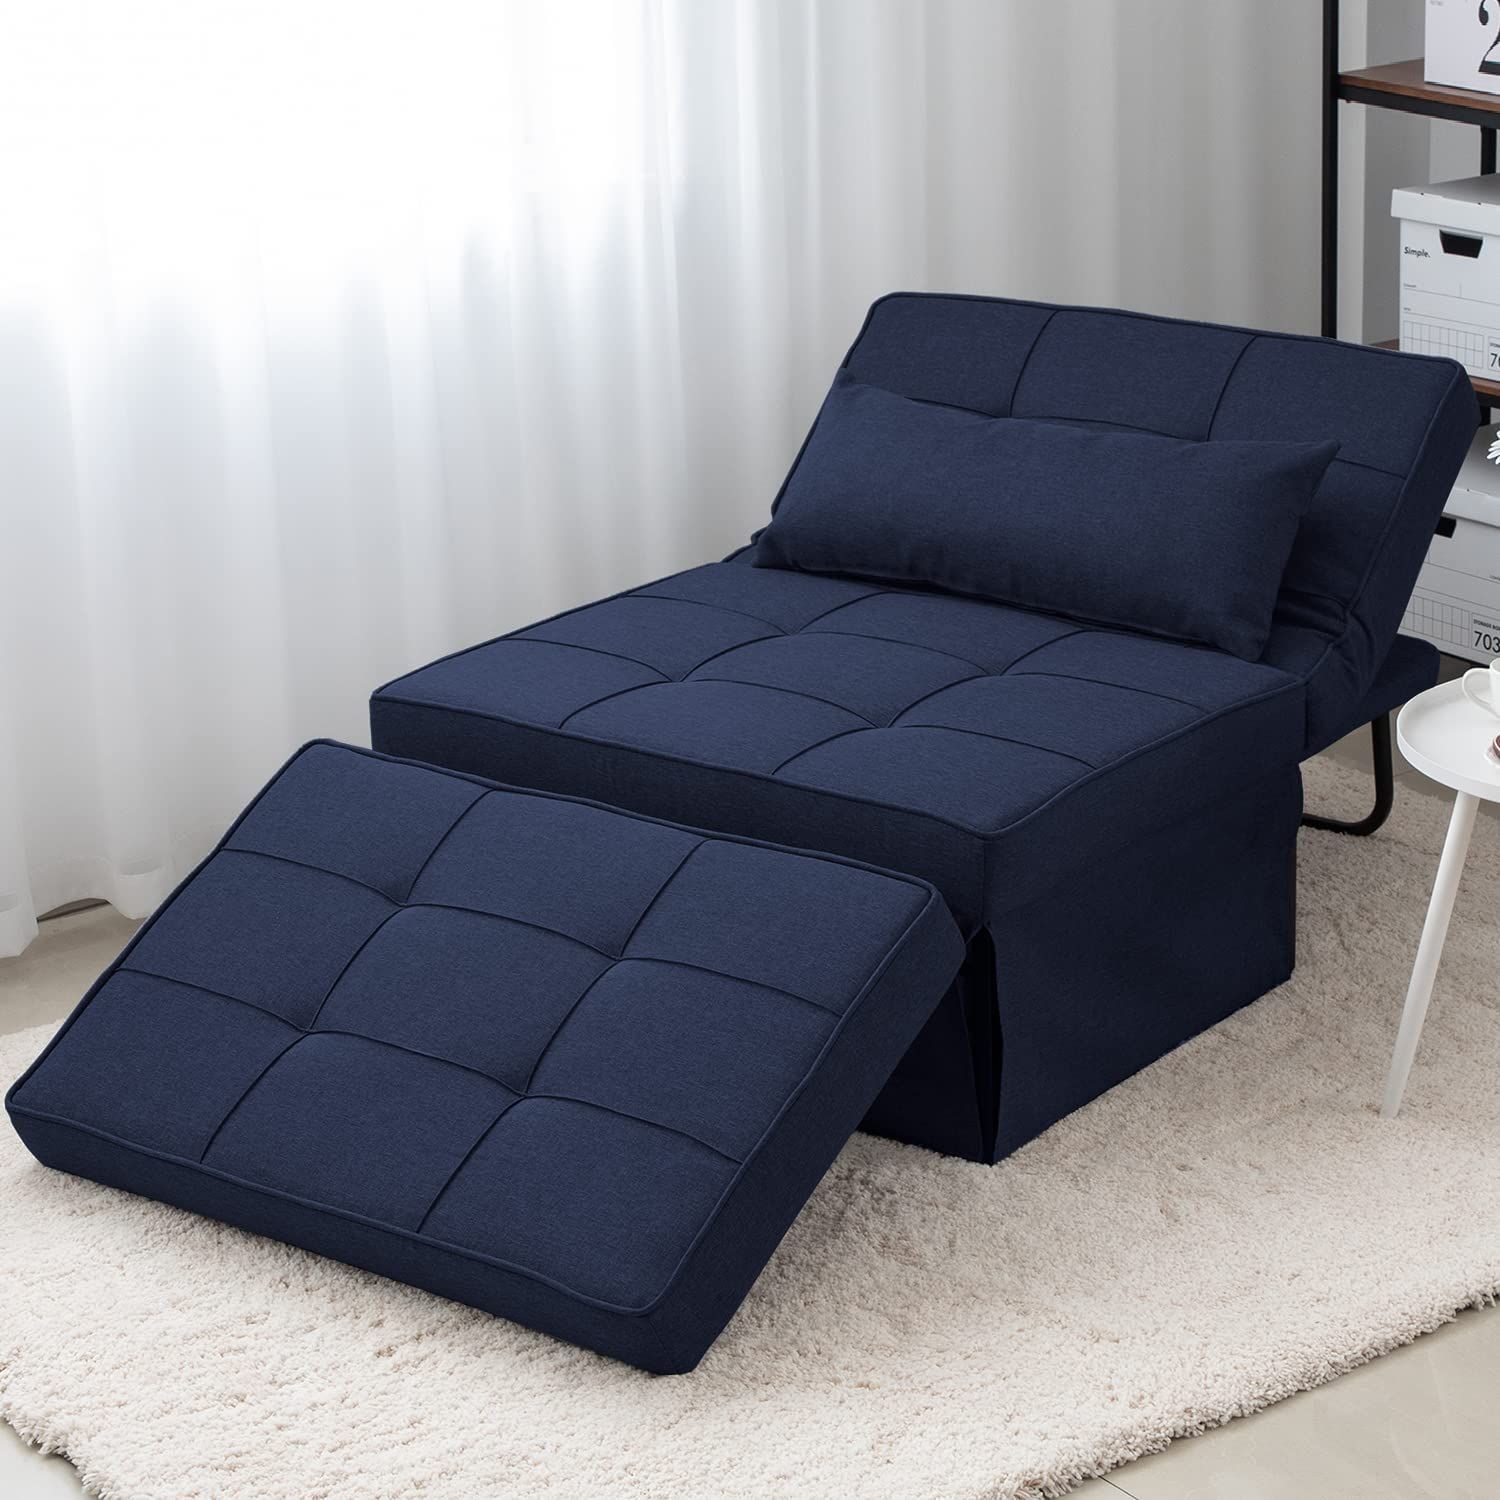 Buy Joyhom Folding Ottoman Sofa Bed, Convertible Chair 4 In 1  Multi Function Modern Breathable Linen Guest Bed With 5 Position Adjustable  Backrest (dark Blue) Online At Lowest Price In Ubuy Kosovo (View 4 of 15)